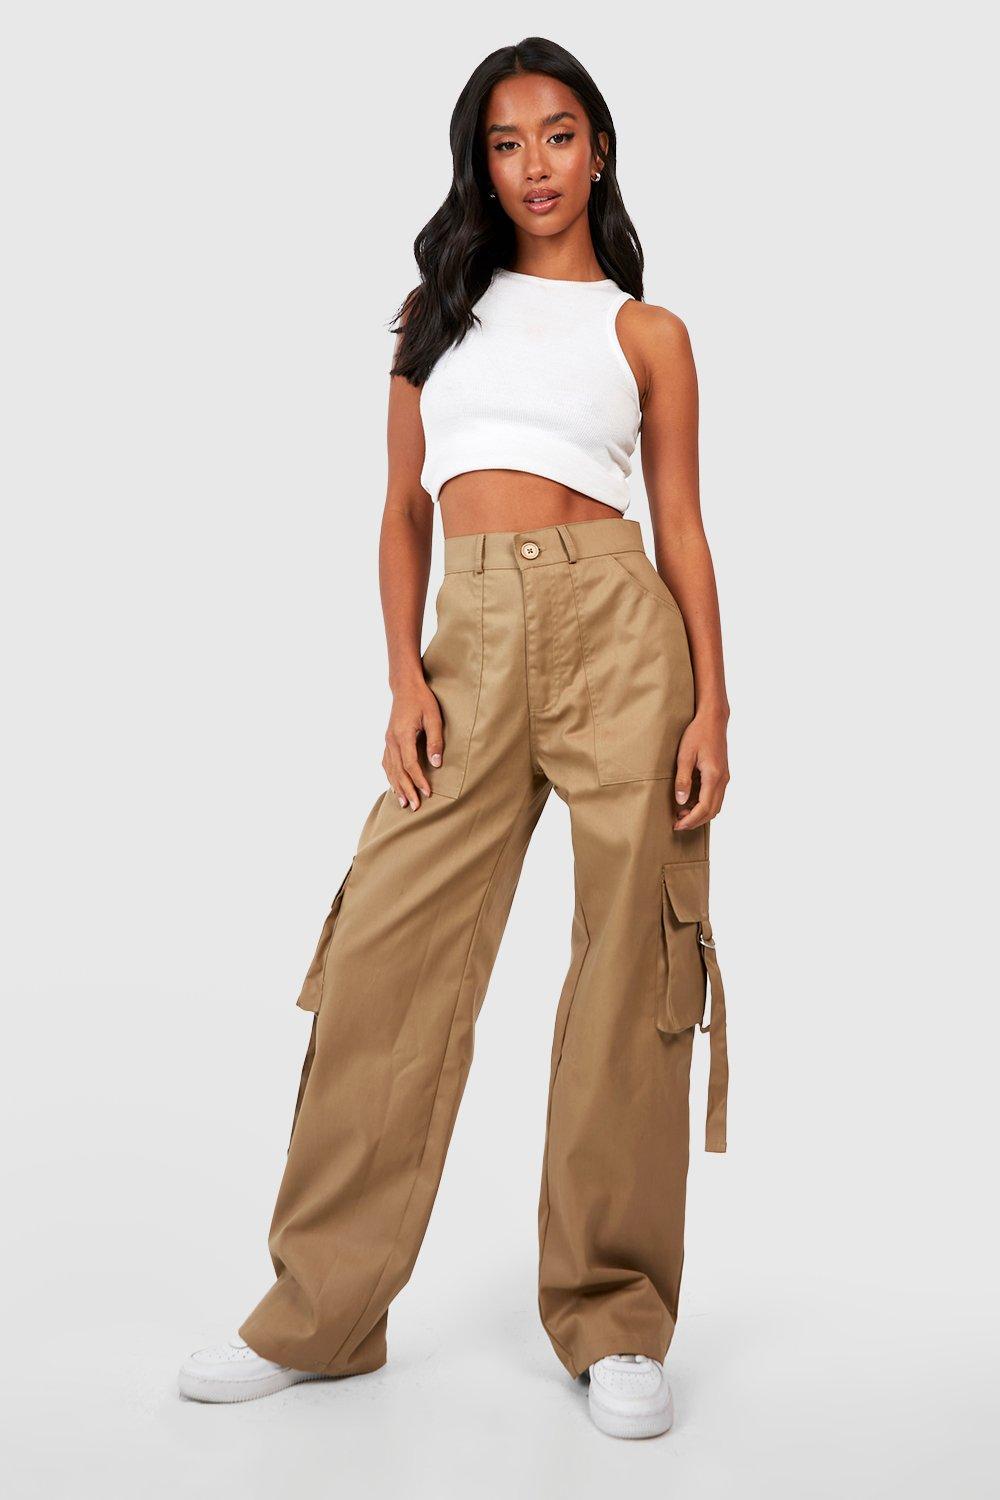 shop PANT StraightLeg Cargo Pants for women by Forever21